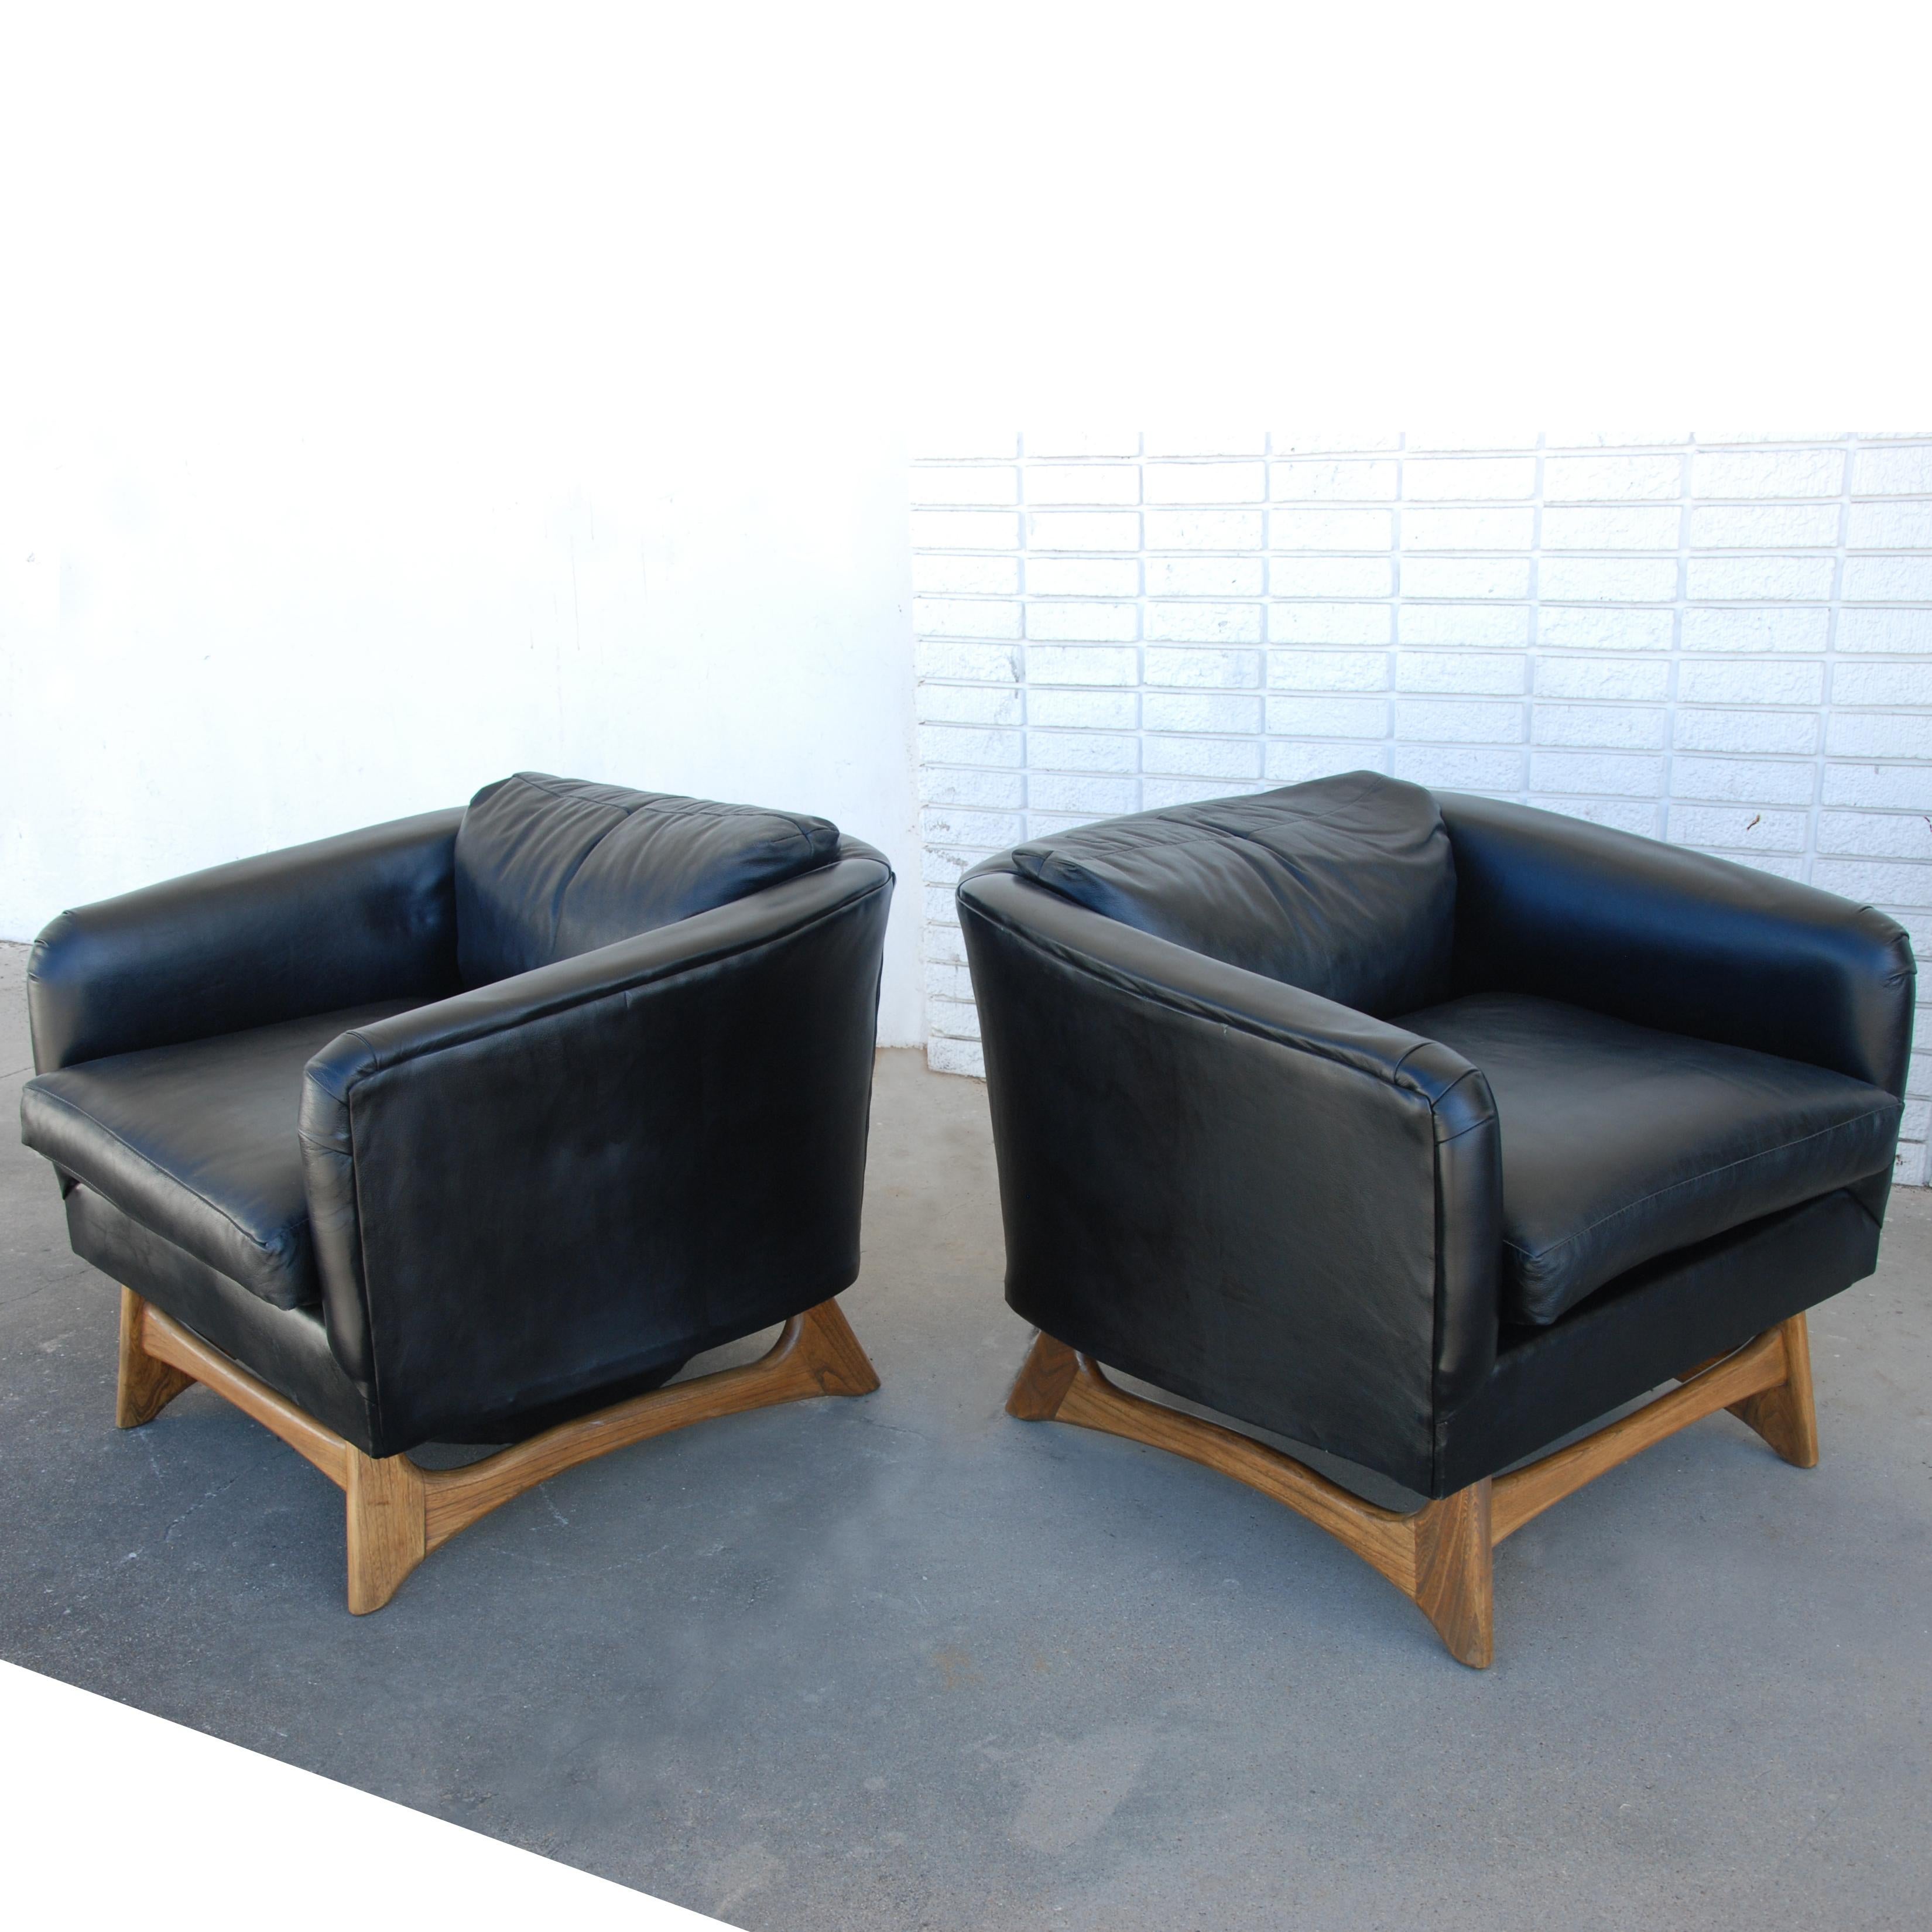 A pair of lounge chairs designed by Adrian Pearsall and made by Craft Associates. New black leather upholstery with Pearsall's signature walnut sculptural bases.